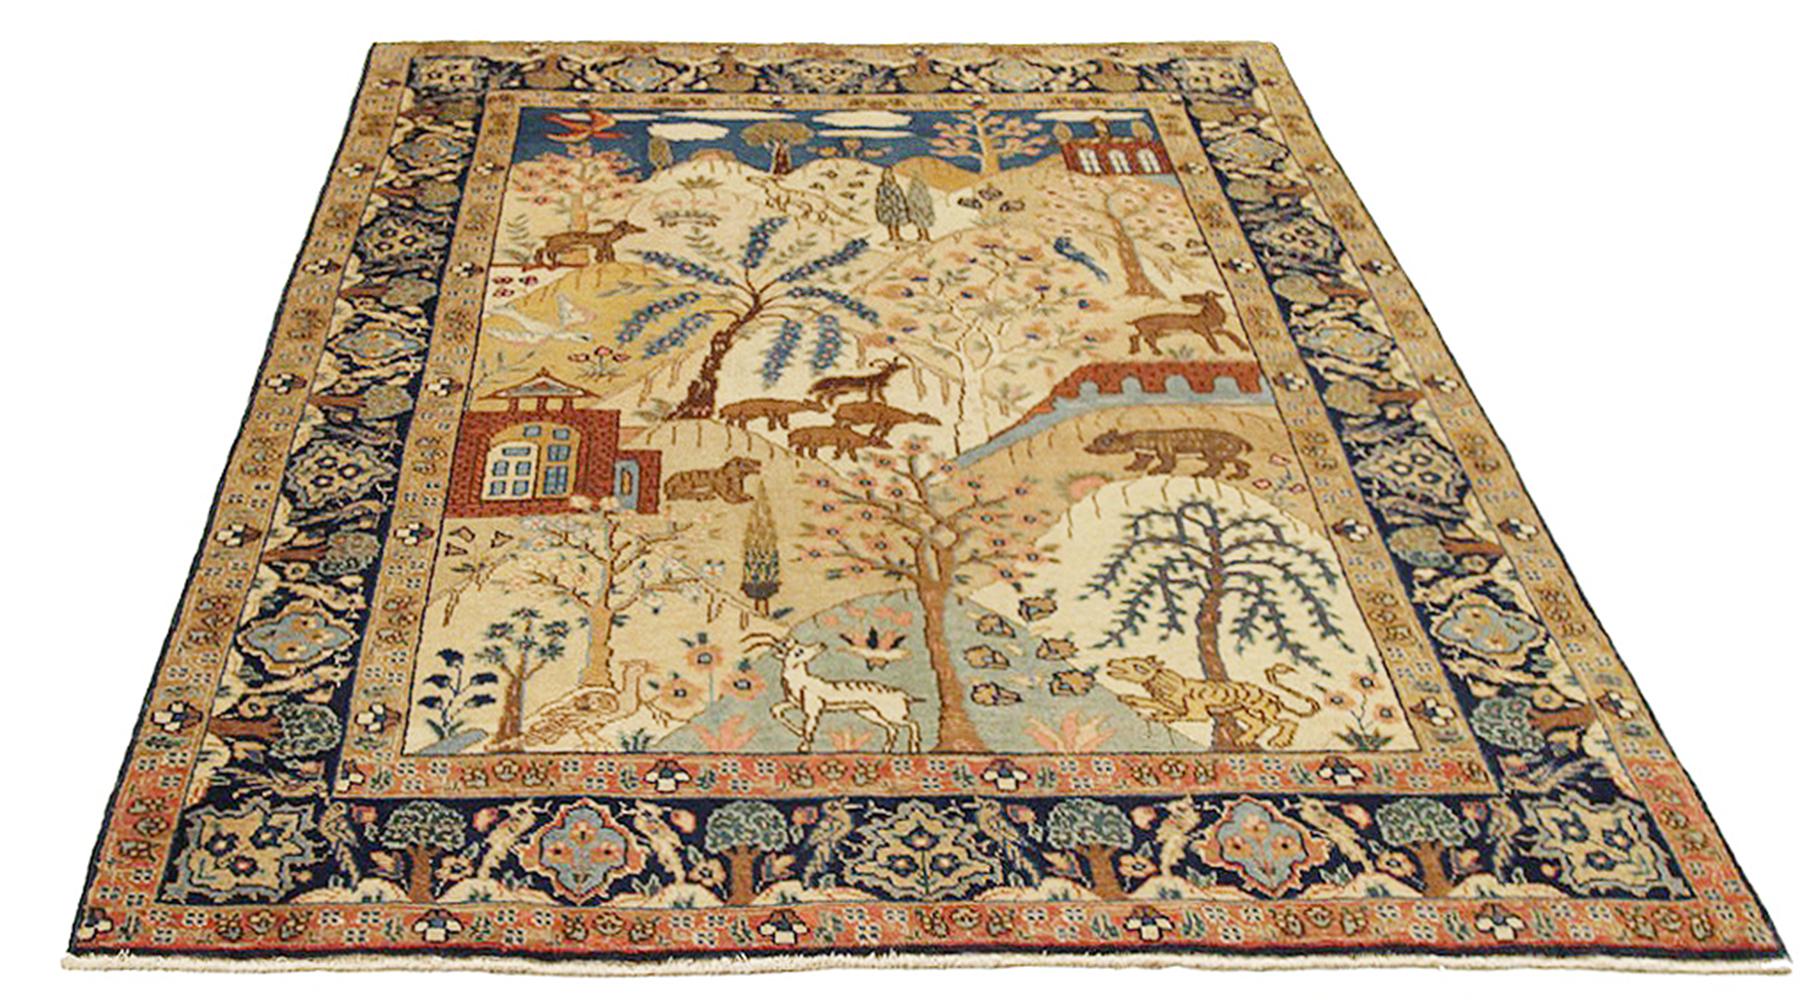 Antique Persian rug handwoven from the finest sheep’s wool and colored with all-natural vegetable dyes that are safe for humans and pets. It’s a traditional Tabriz weaving featuring a stunning ensemble of animal designs and colorful landscape